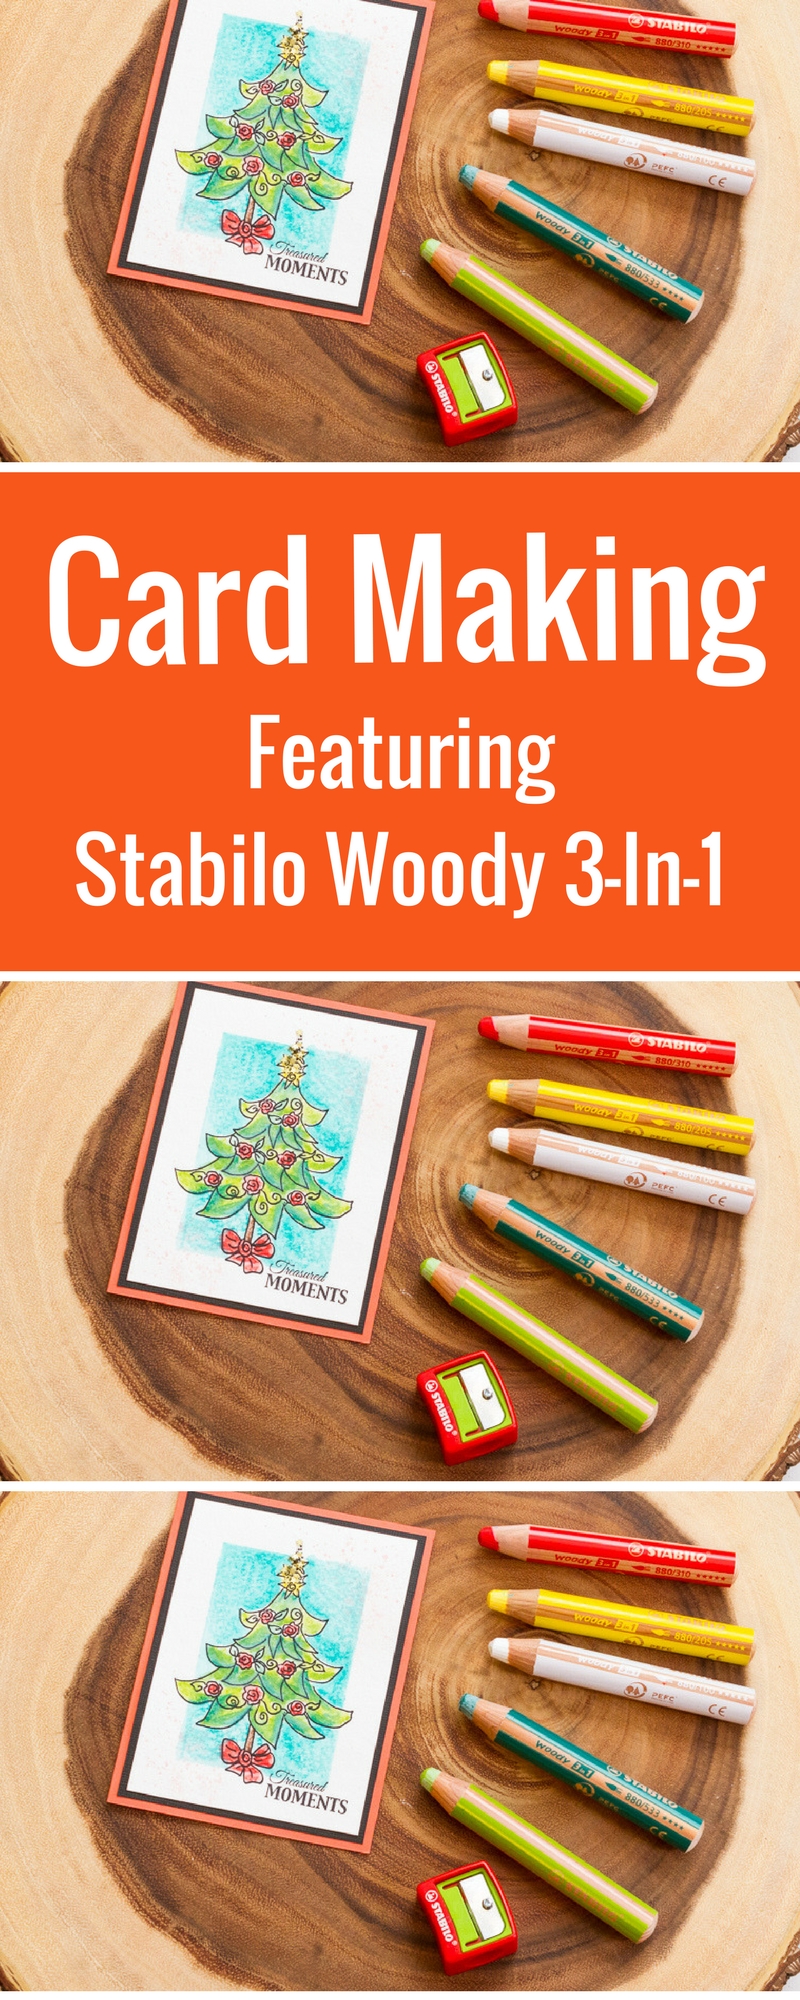 Card Making | Christmas Cards | Scrapbooking | Featuring Stabilo Woody 3-IN-1 | Designed by Kim Gowdy | Creative Scrapbooker Magazine